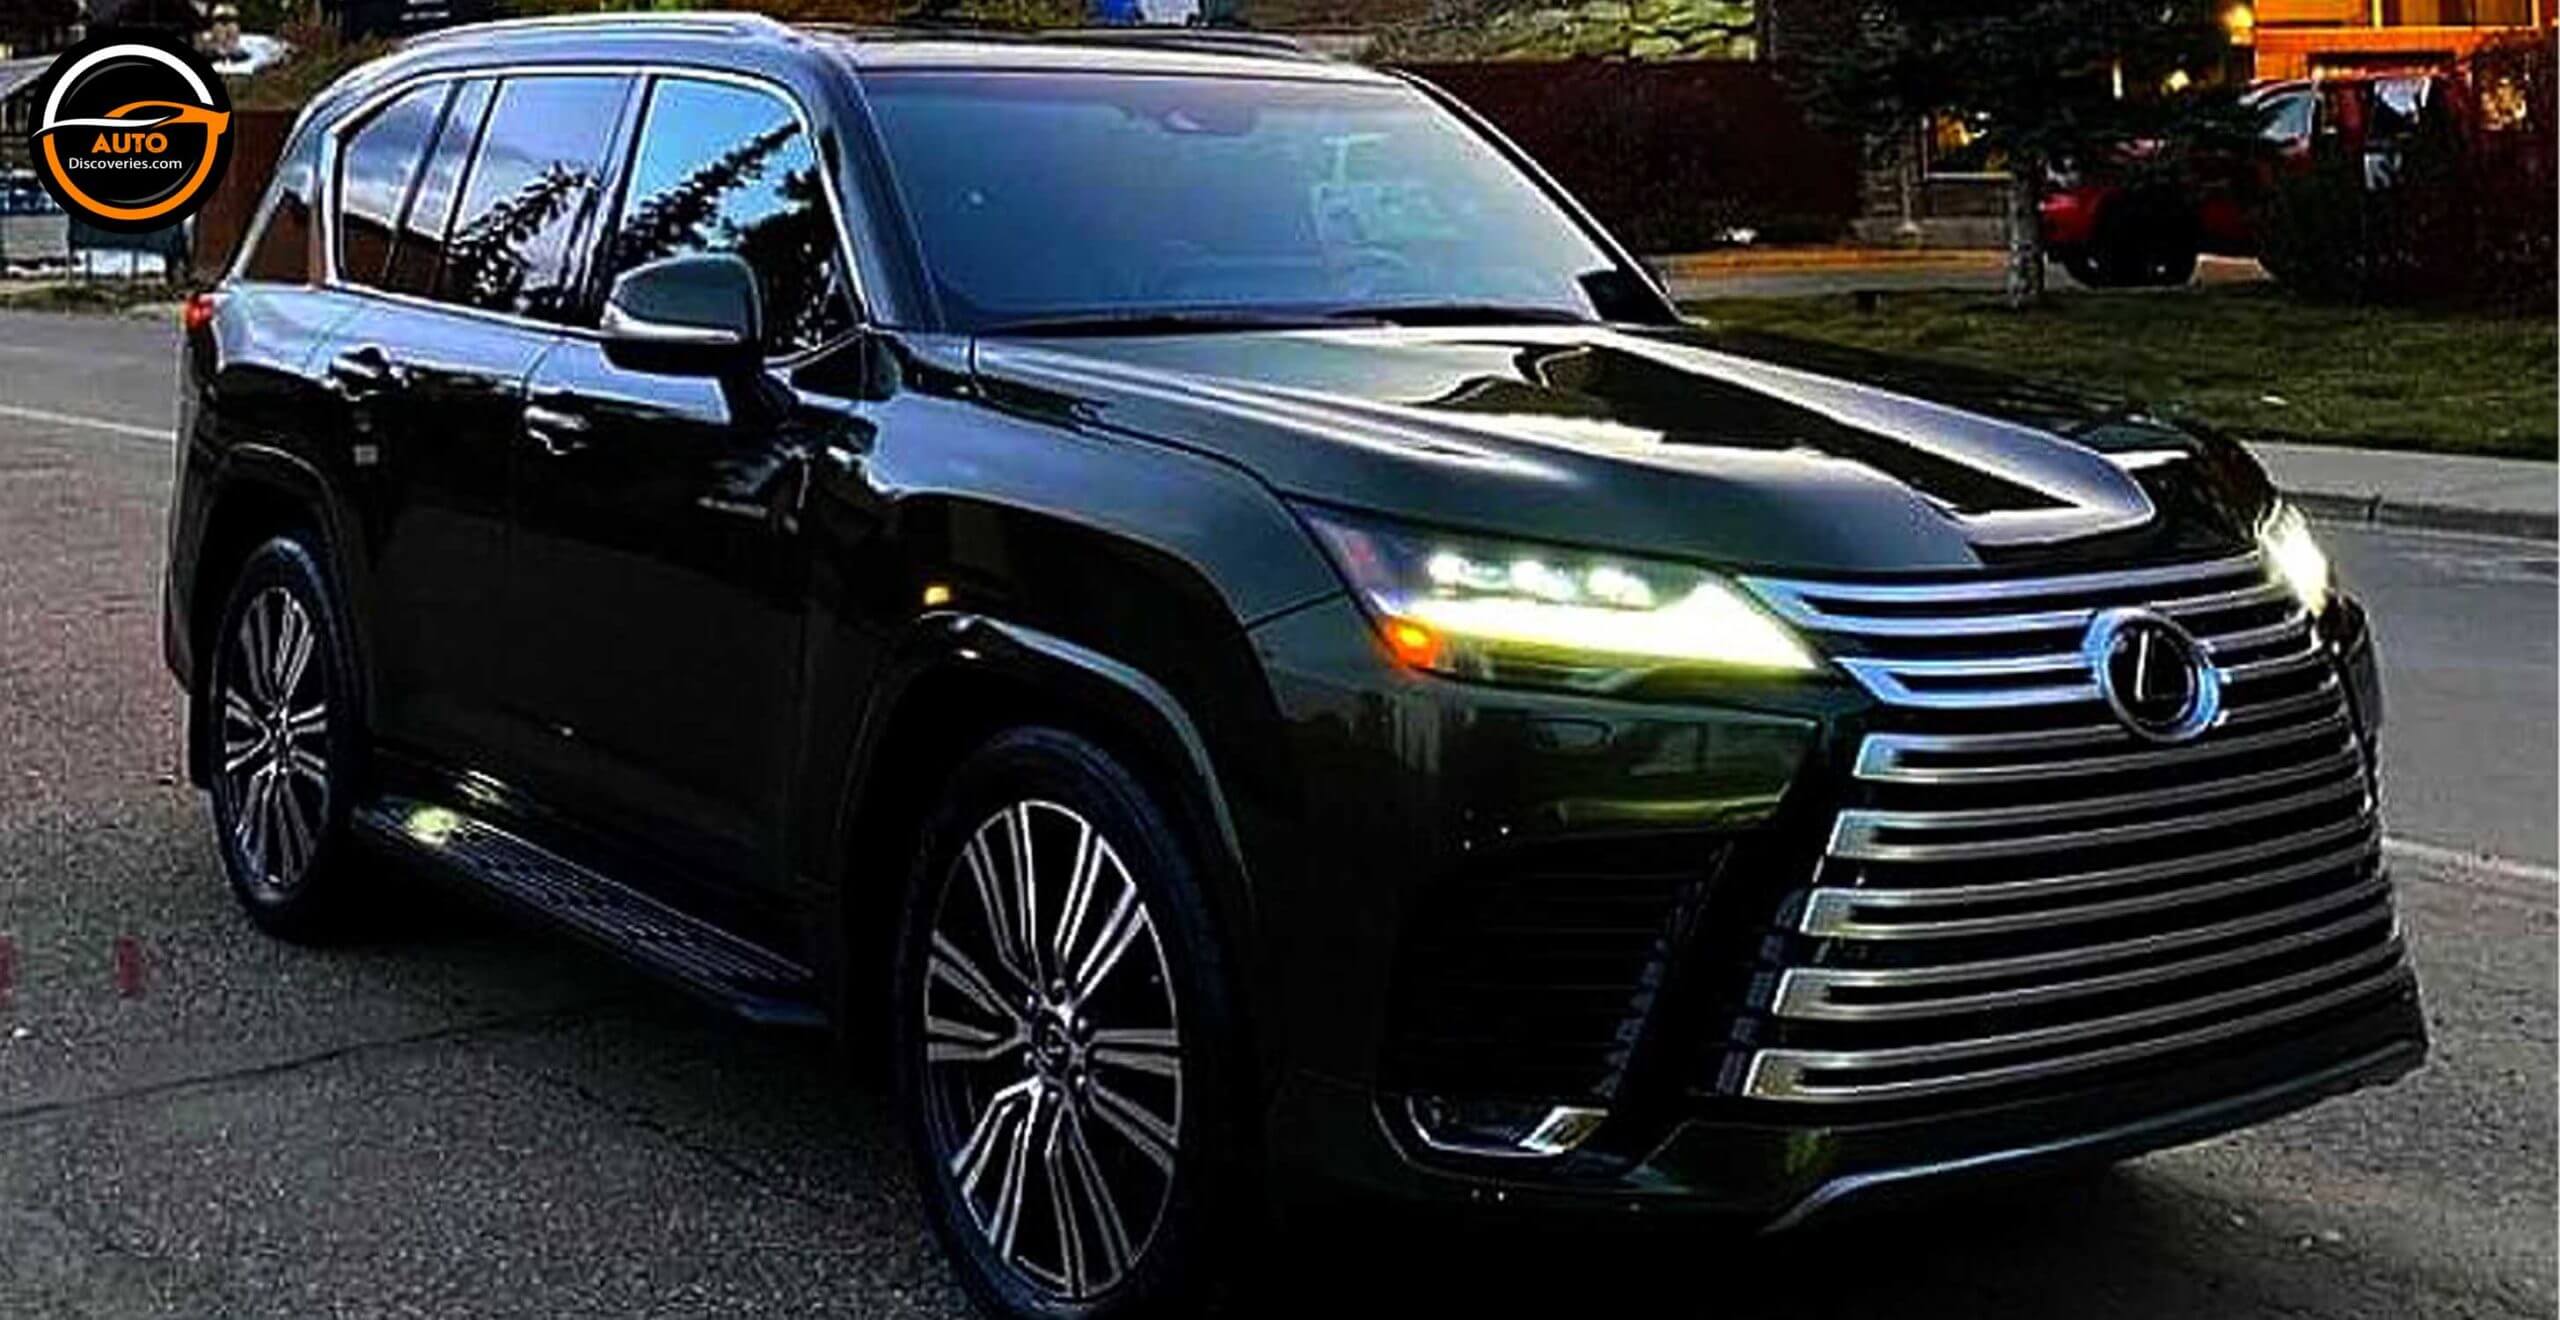 2022 Lexus Lx600 In Army Green Ultra Luxurious Suv Auto Discoveries